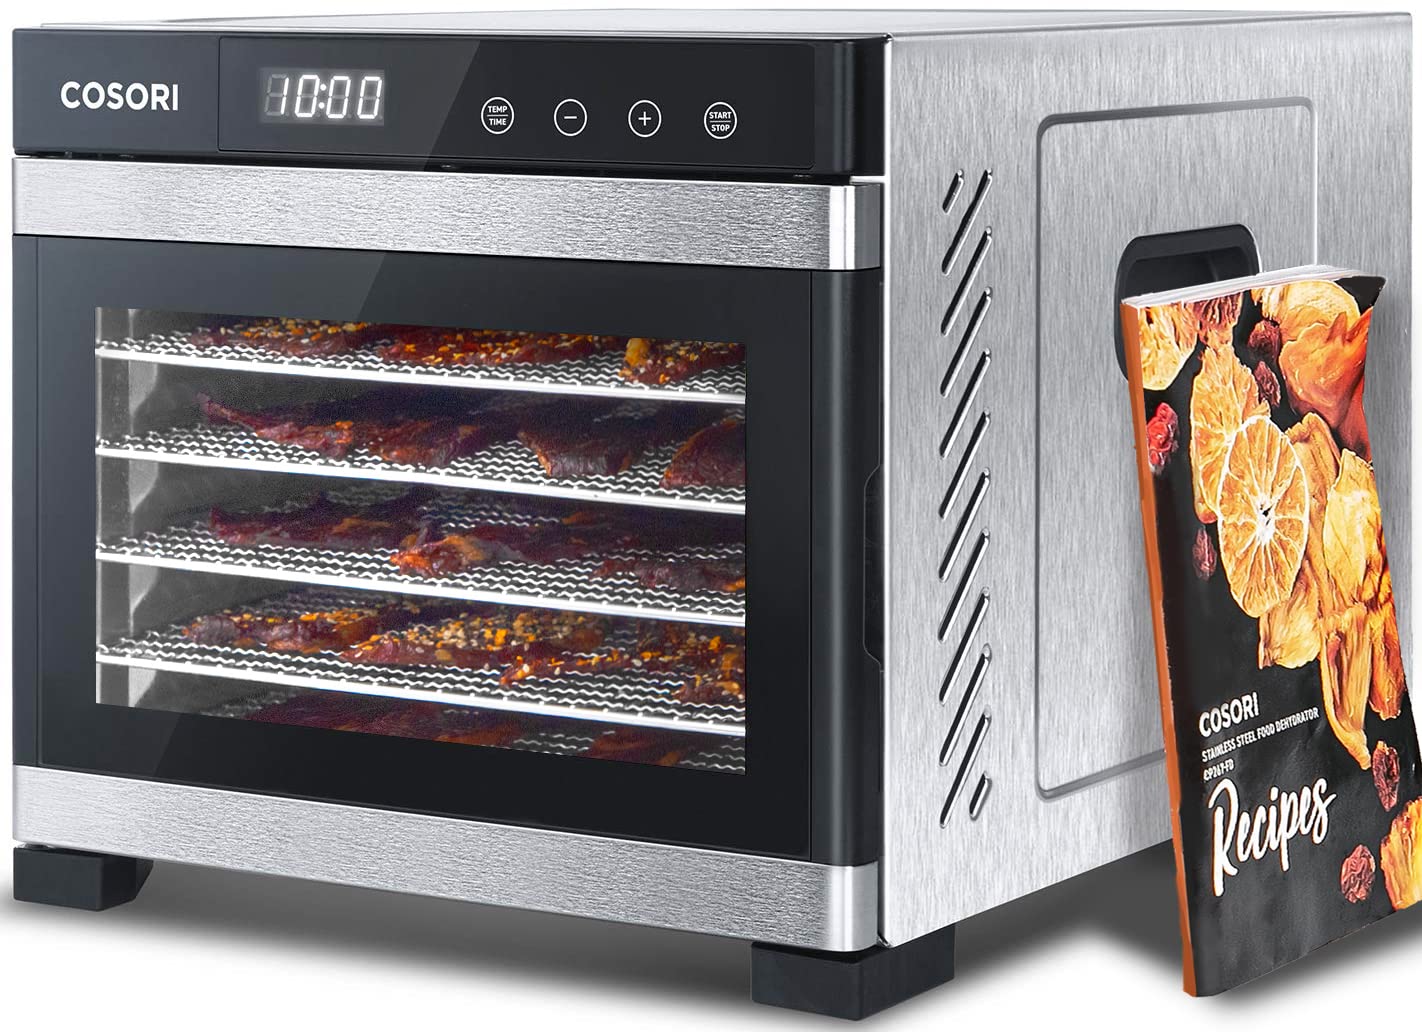 COSORI Food Dehydrator for Jerky, Large Drying Space with 6.48ft², 600W Dehydrated Dryer, 6 Stainless Steel Trays, 48H Timer, 165°F Temperature Control,Only $129.99